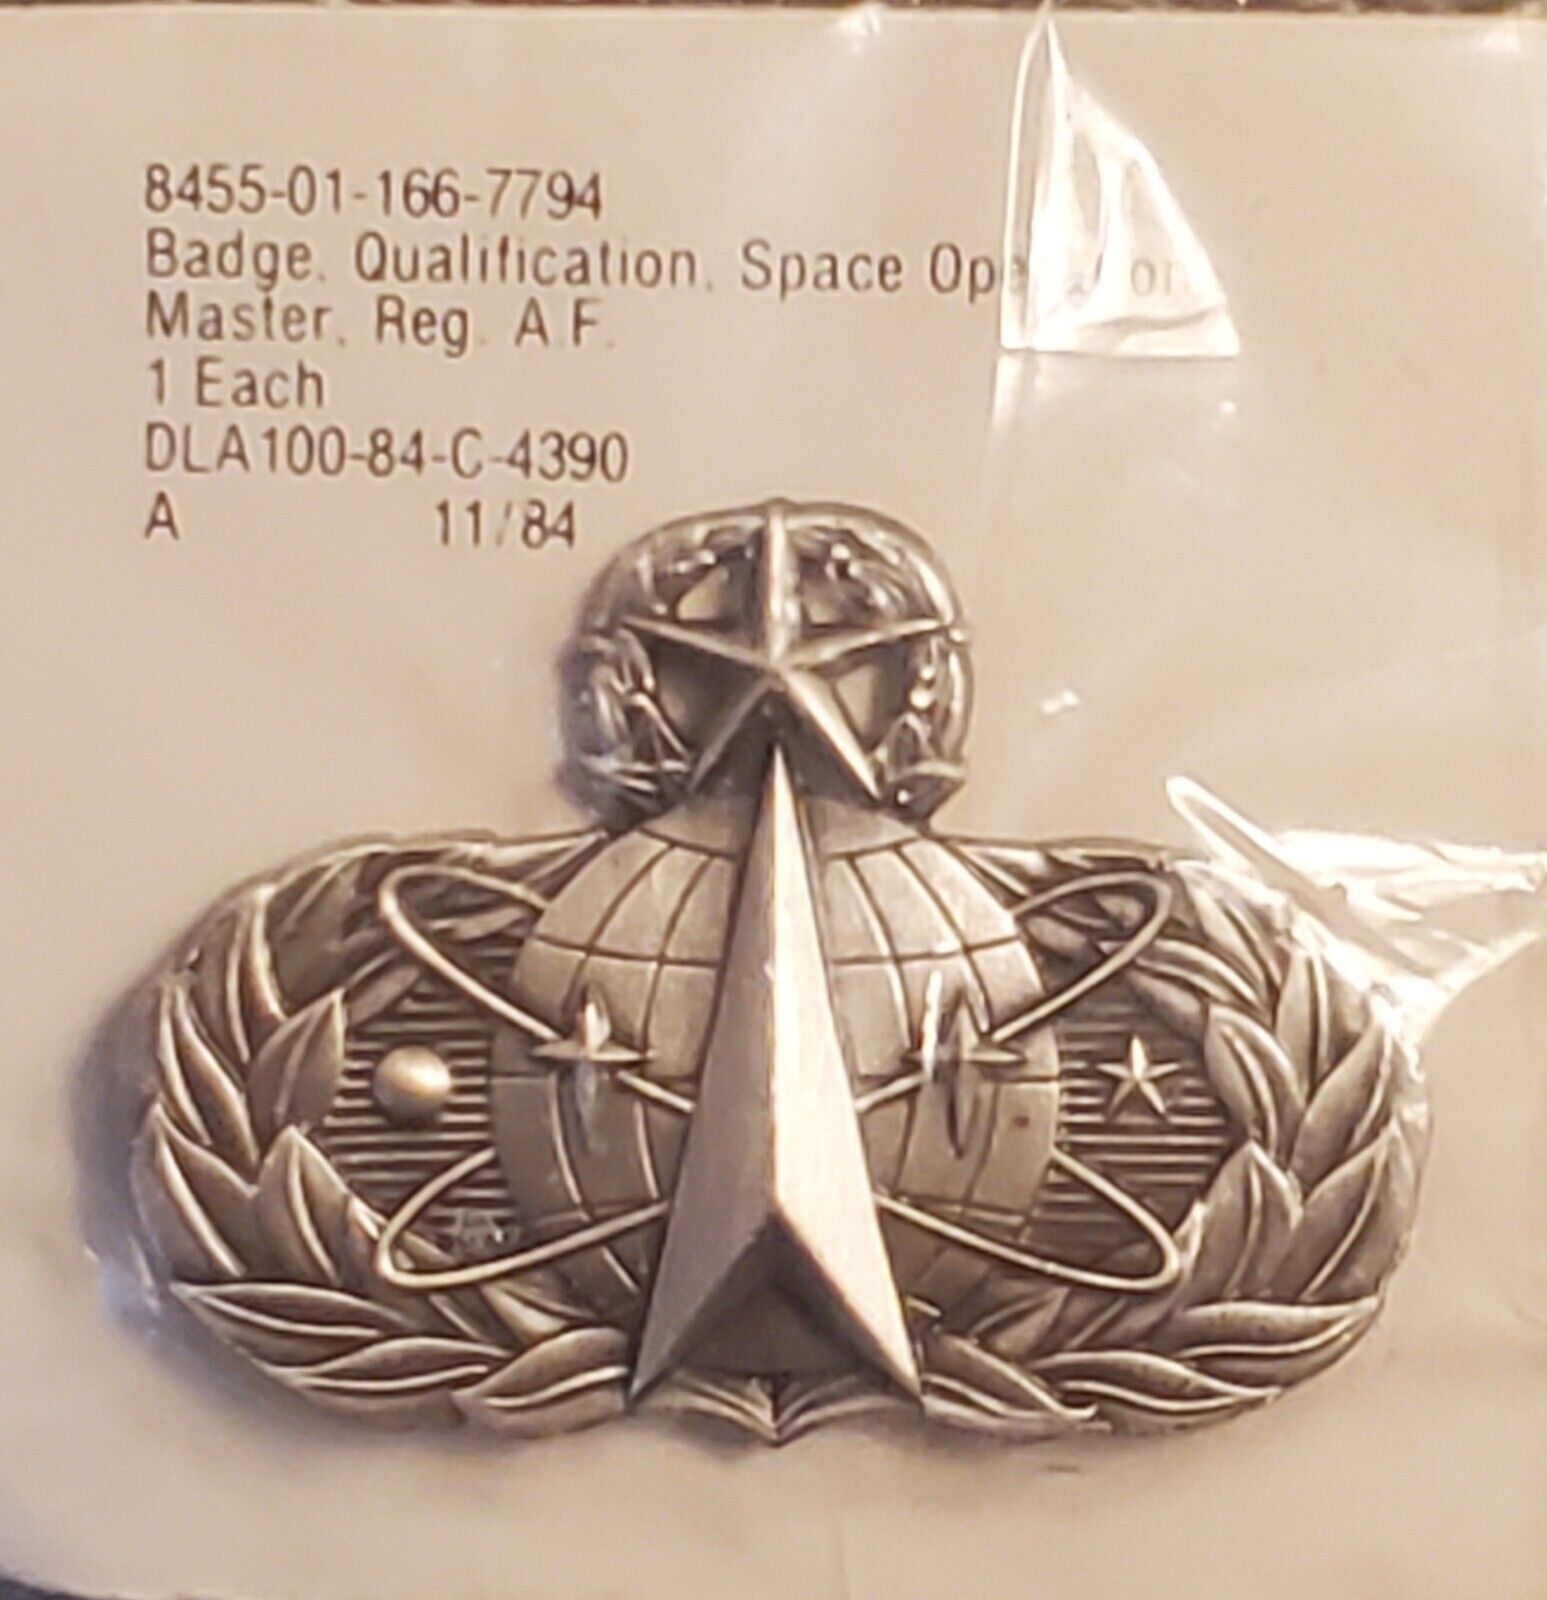 USAF AIR FORCE QUALIFICATION SPACE OPERATION MASTER PIN FULL SIZE NIP 1984 BADGE